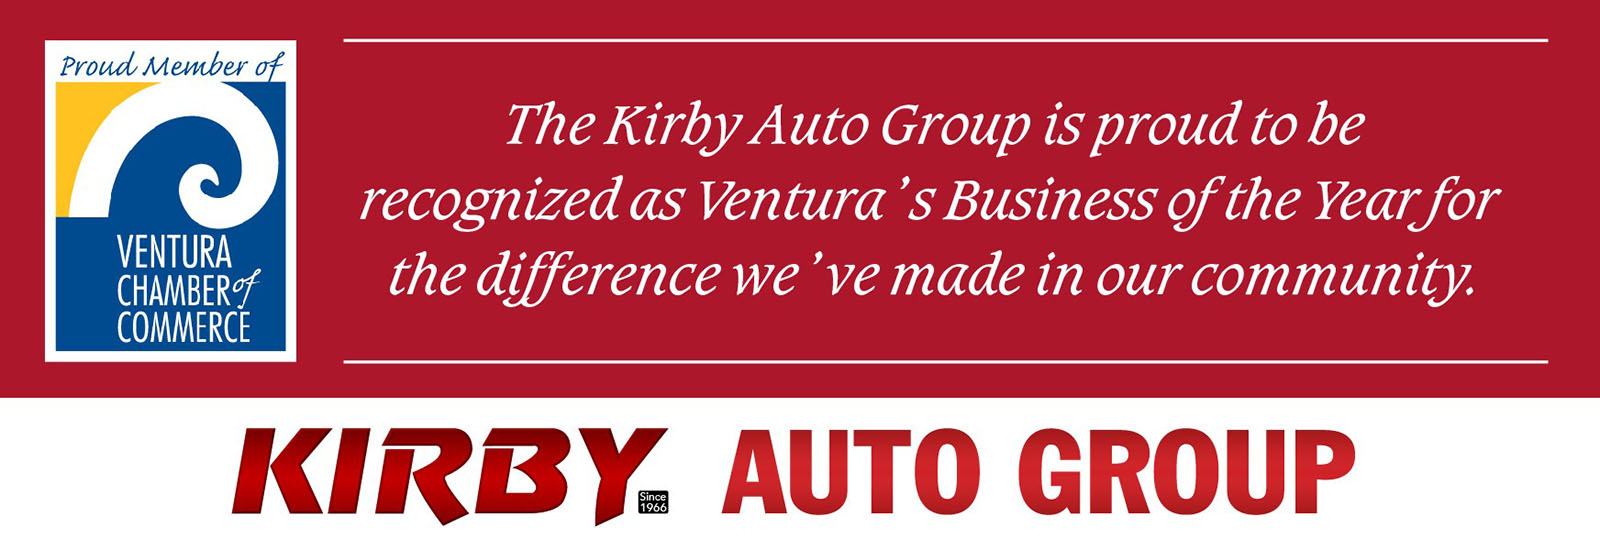 Ventura Chamber of Commerce Business of the Year - Kirby Automotive